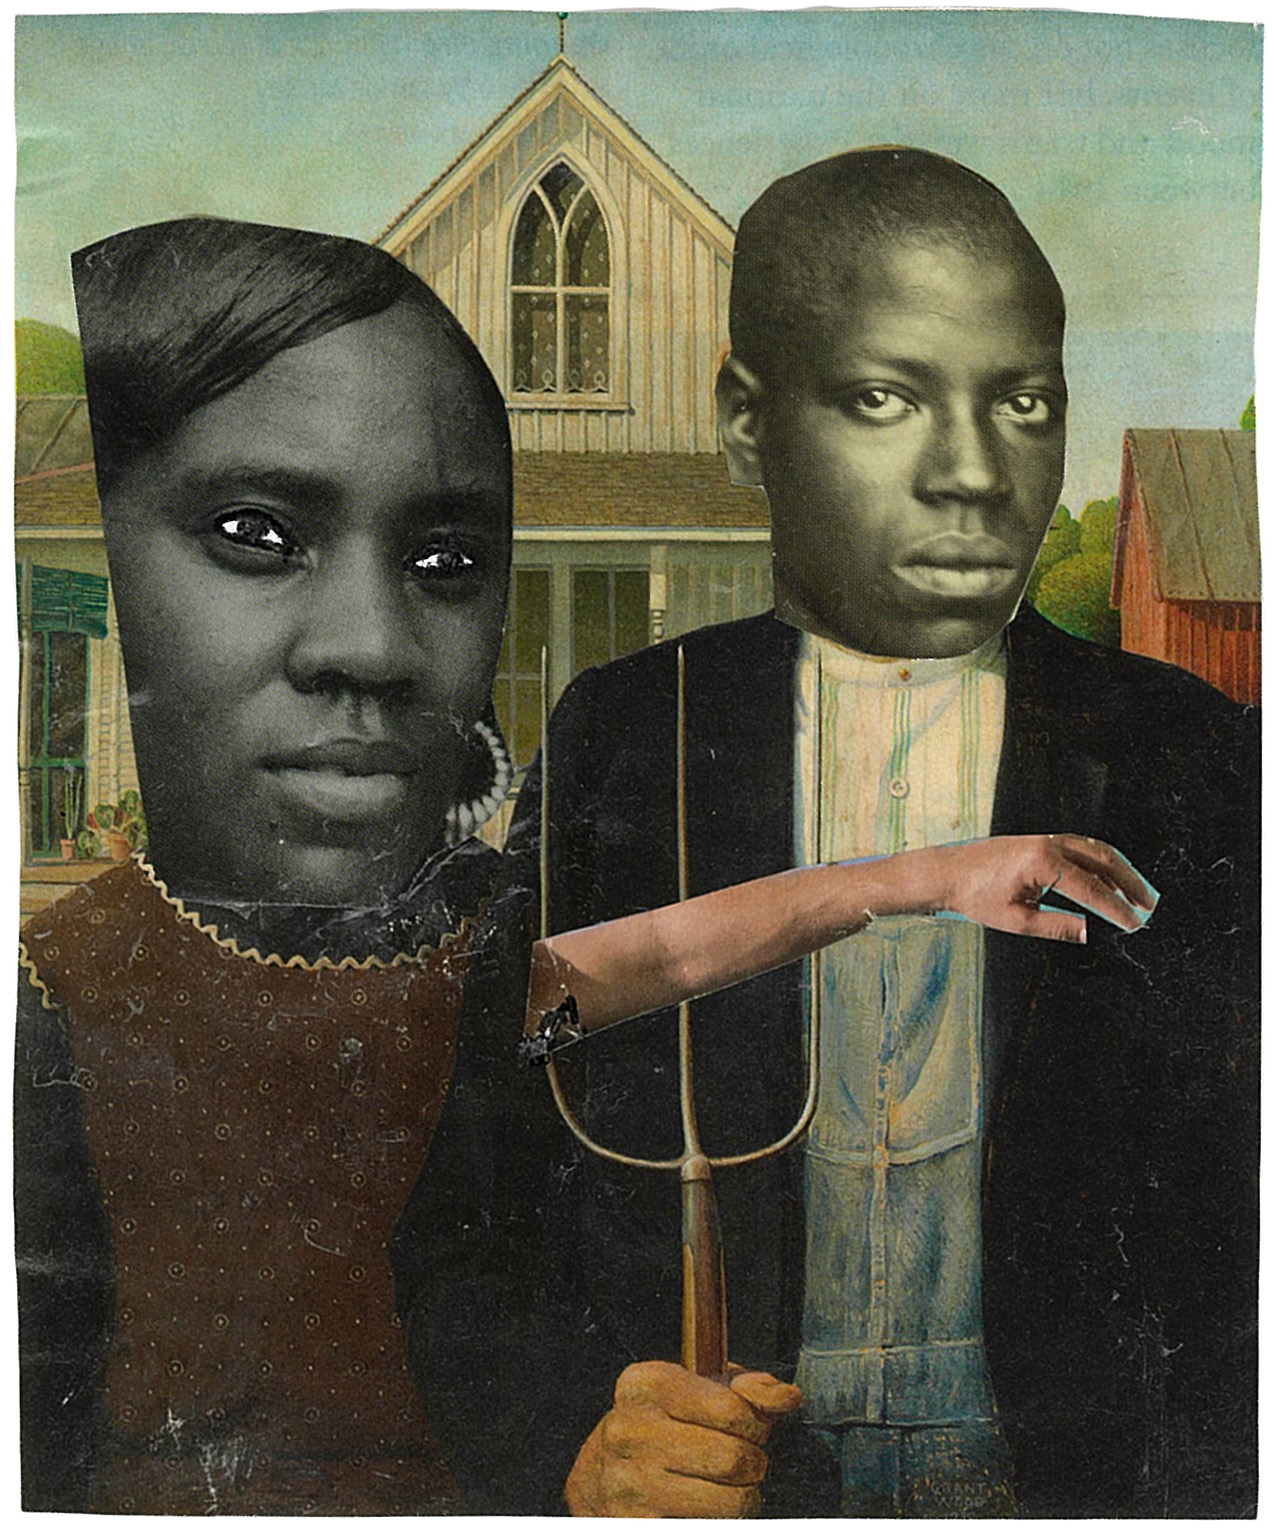 photo collage: American Gothic with the faces replaced by grayscale photos of an African American woman and man, and a white arm on the pitchfork